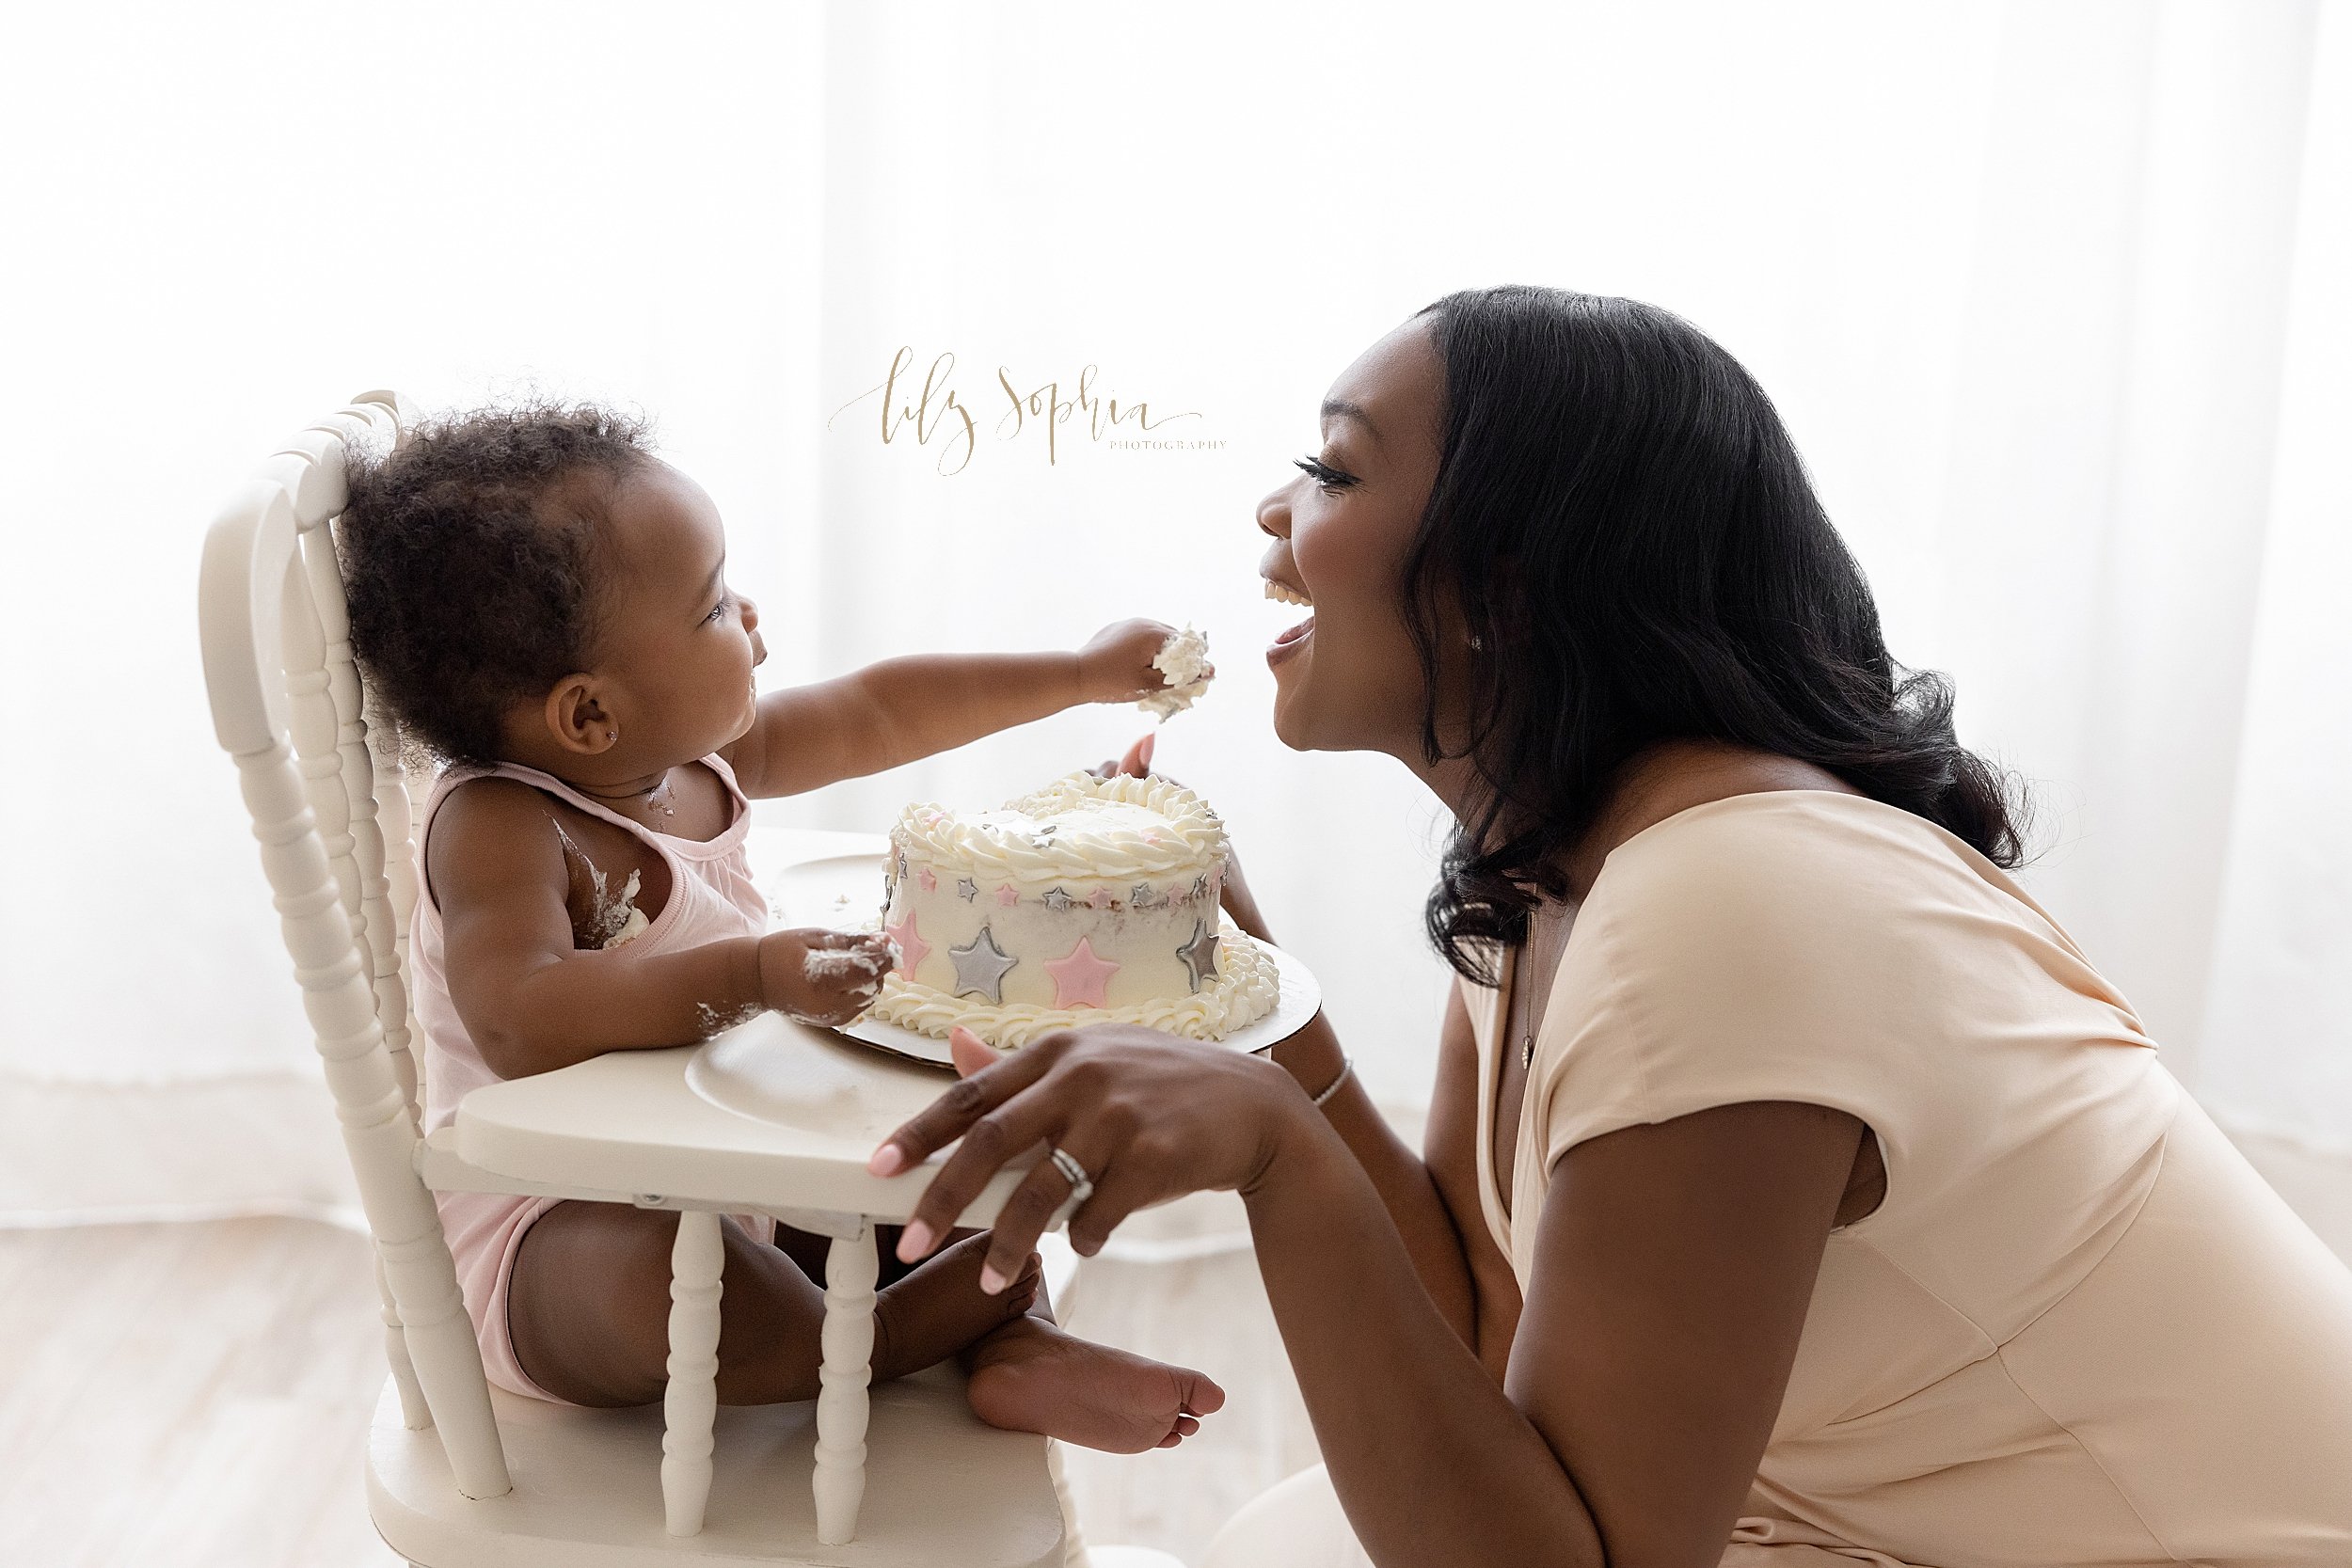  Smash cake photo session celebrating the first birthday of a black baby girl as her mom kneels in front of an antique high chair while the baby girl reaches to give a bite of her cake to her mother taken in front of a window streaming natural light 